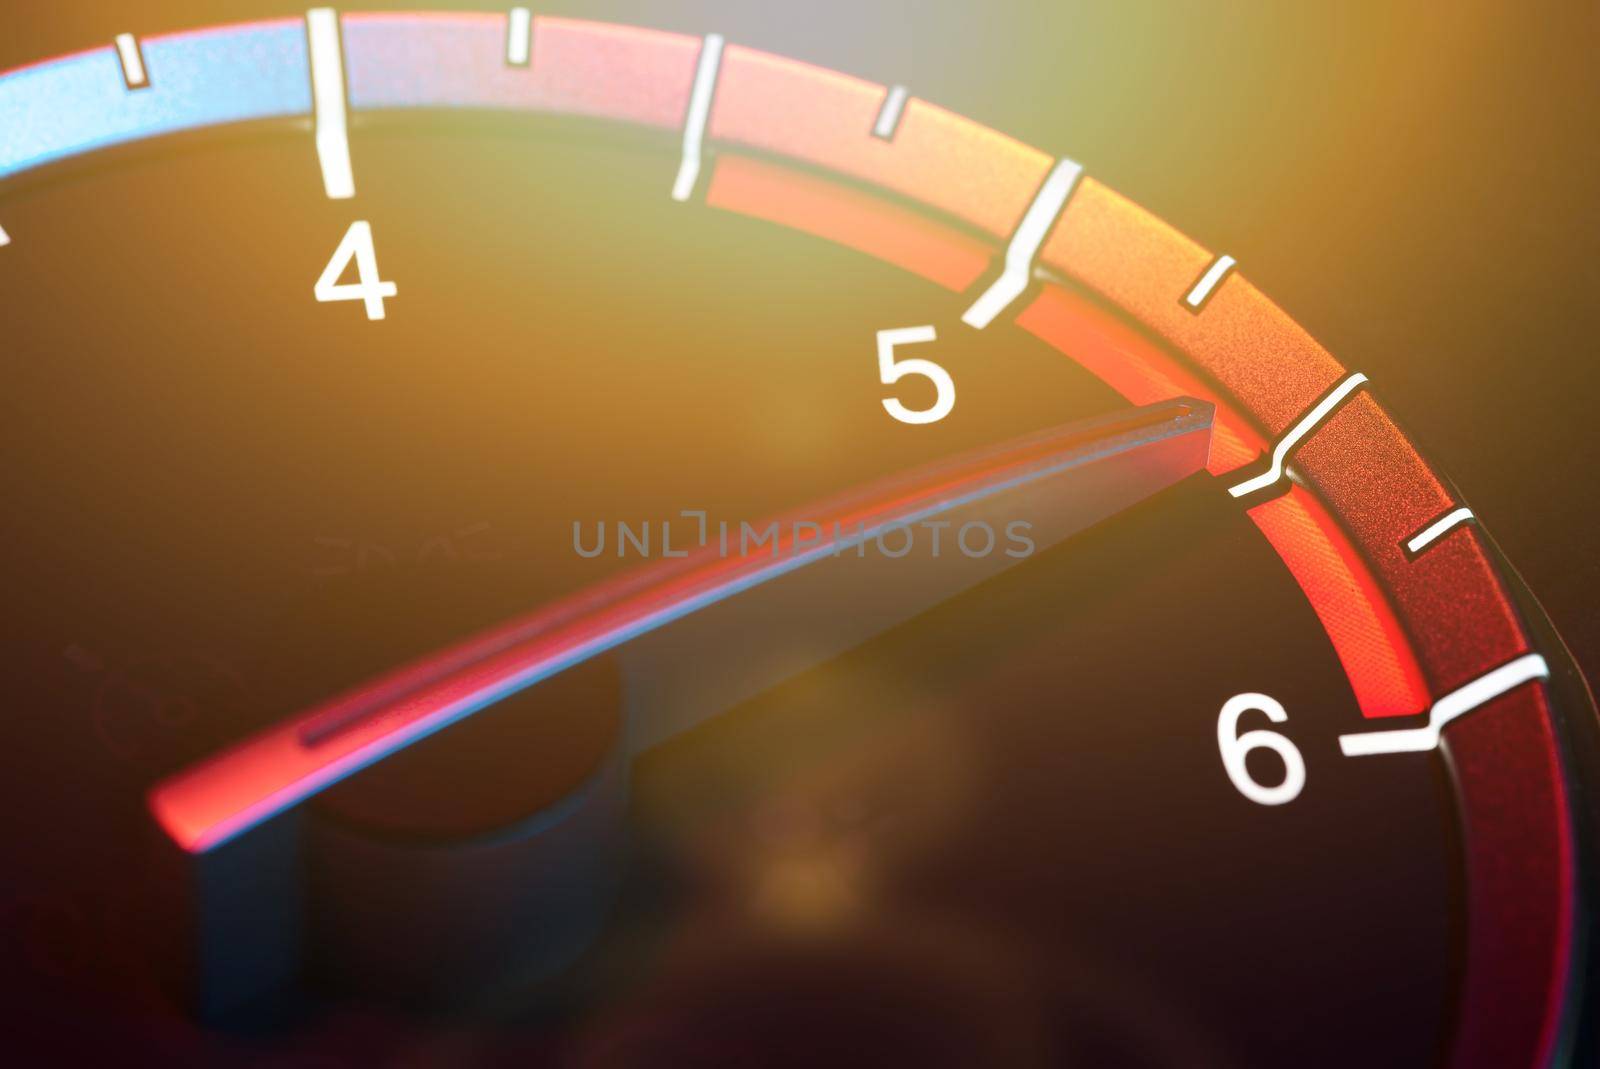 Rpm car odometer detail 4 by pippocarlot